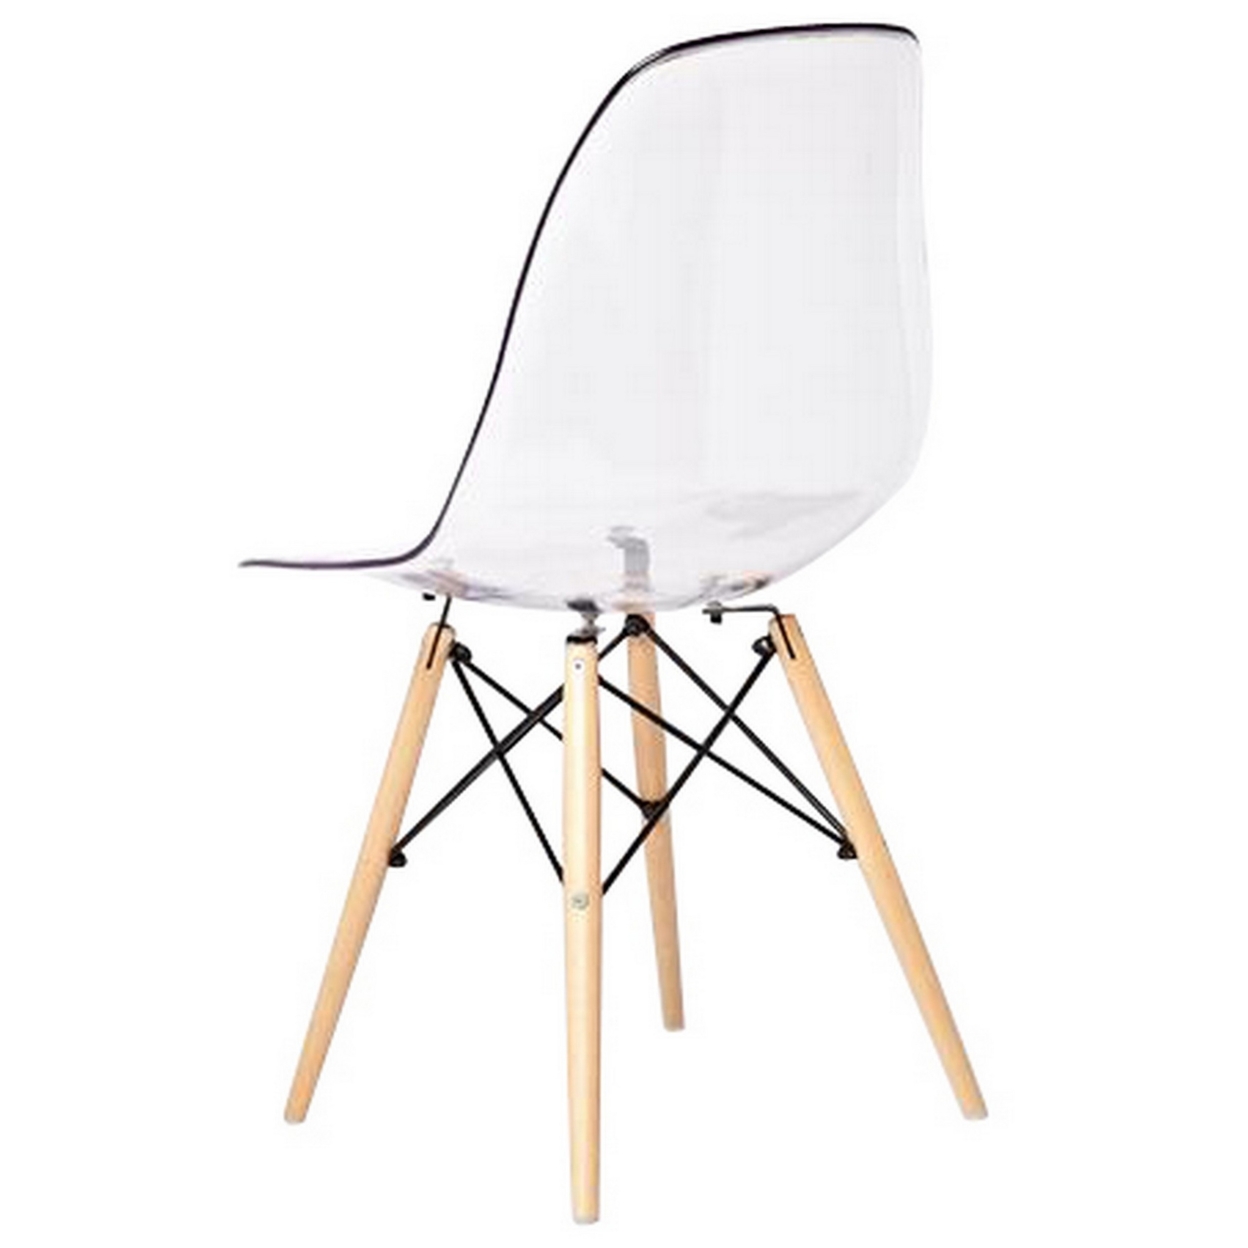 Louie 21 Inch Modern Side Chair, Wood Finished Legs, Translucent Seating- Saltoro Sherpi